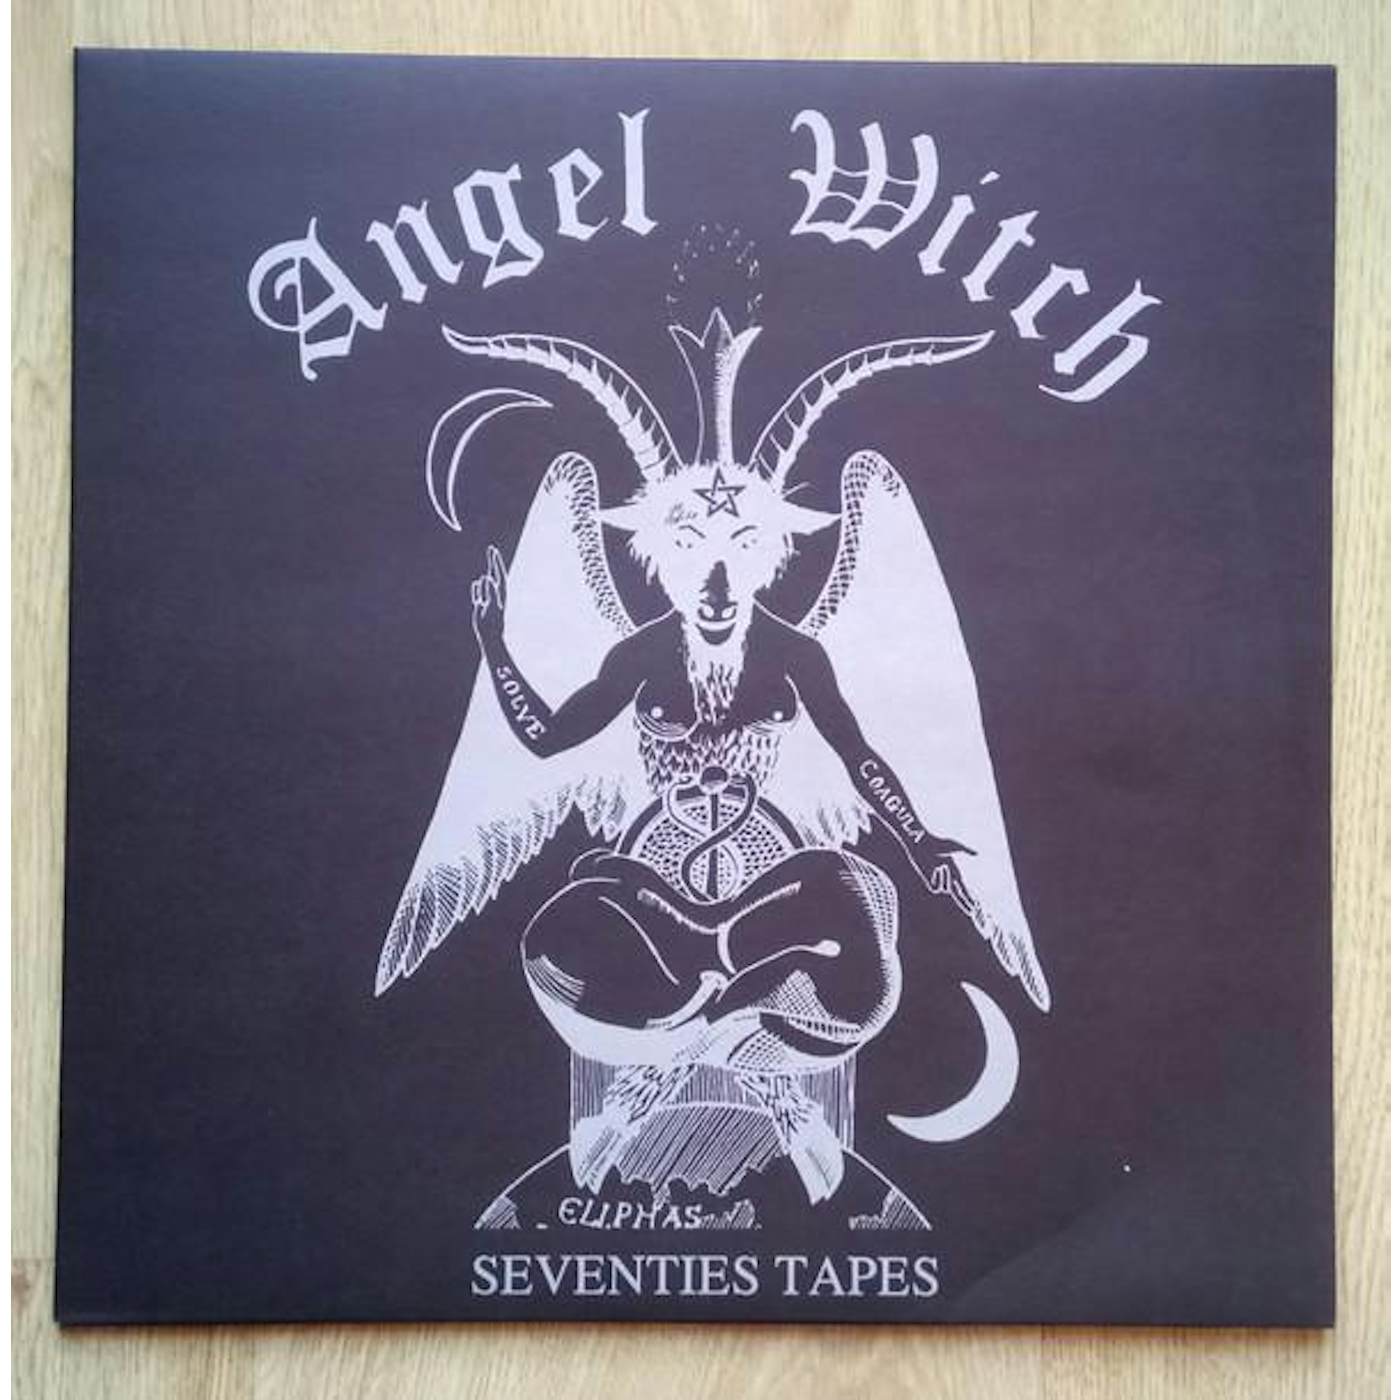 Angel Witch SEVENTIES TAPES Vinyl Record